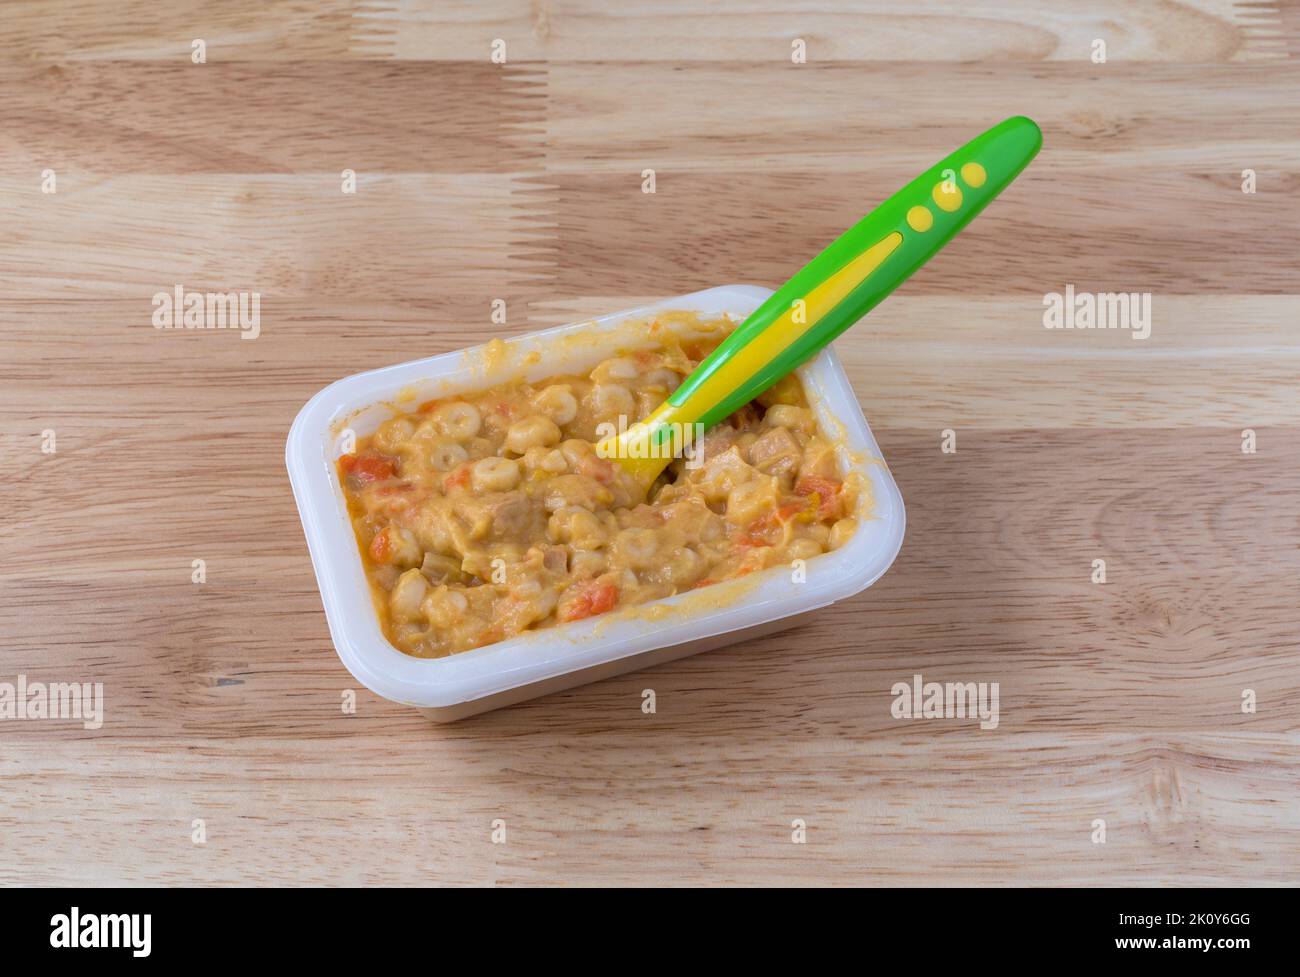 Macaroni and cheese baby food with a spoon in the food on a wood tabletop illuminated with natural light. Stock Photo